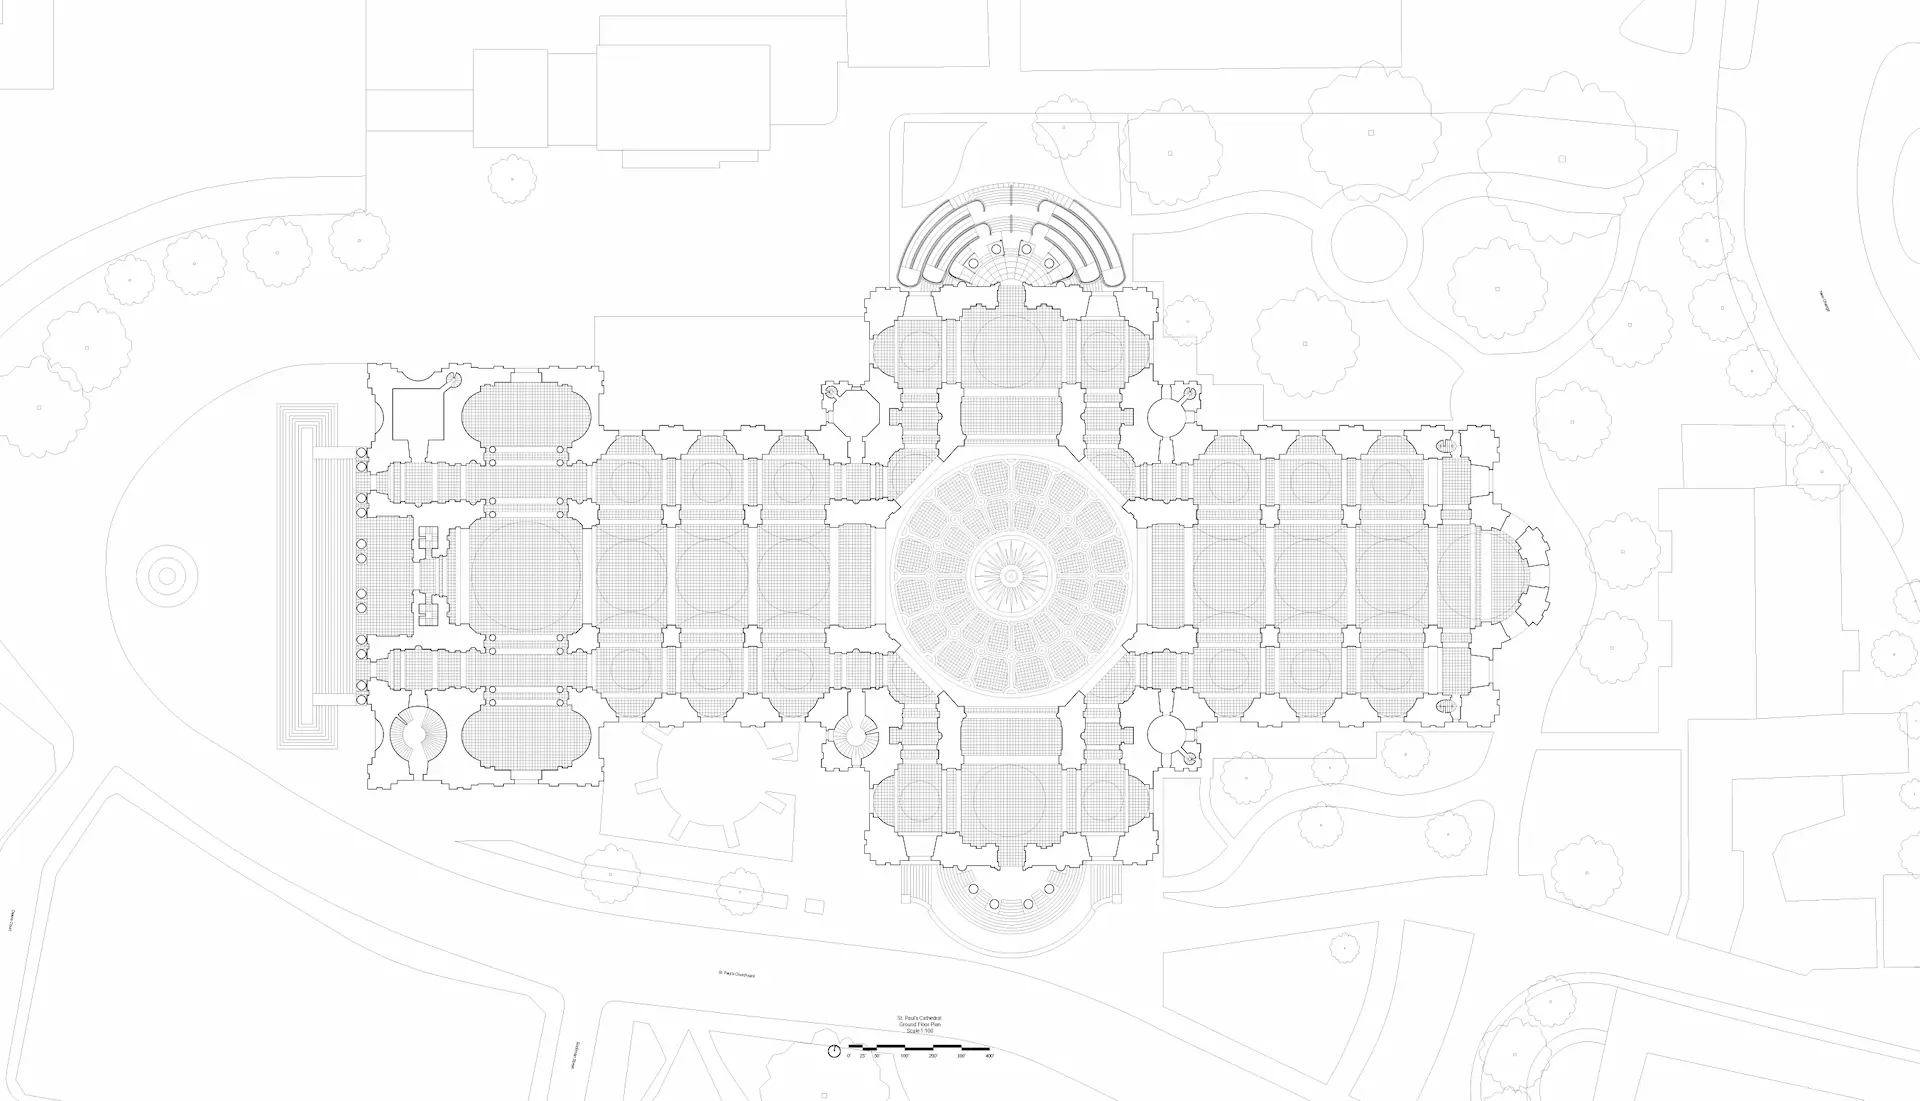 Plan of St Paul's Cathedral, Kathleen O'Gara and Sophia Swanson, 2022